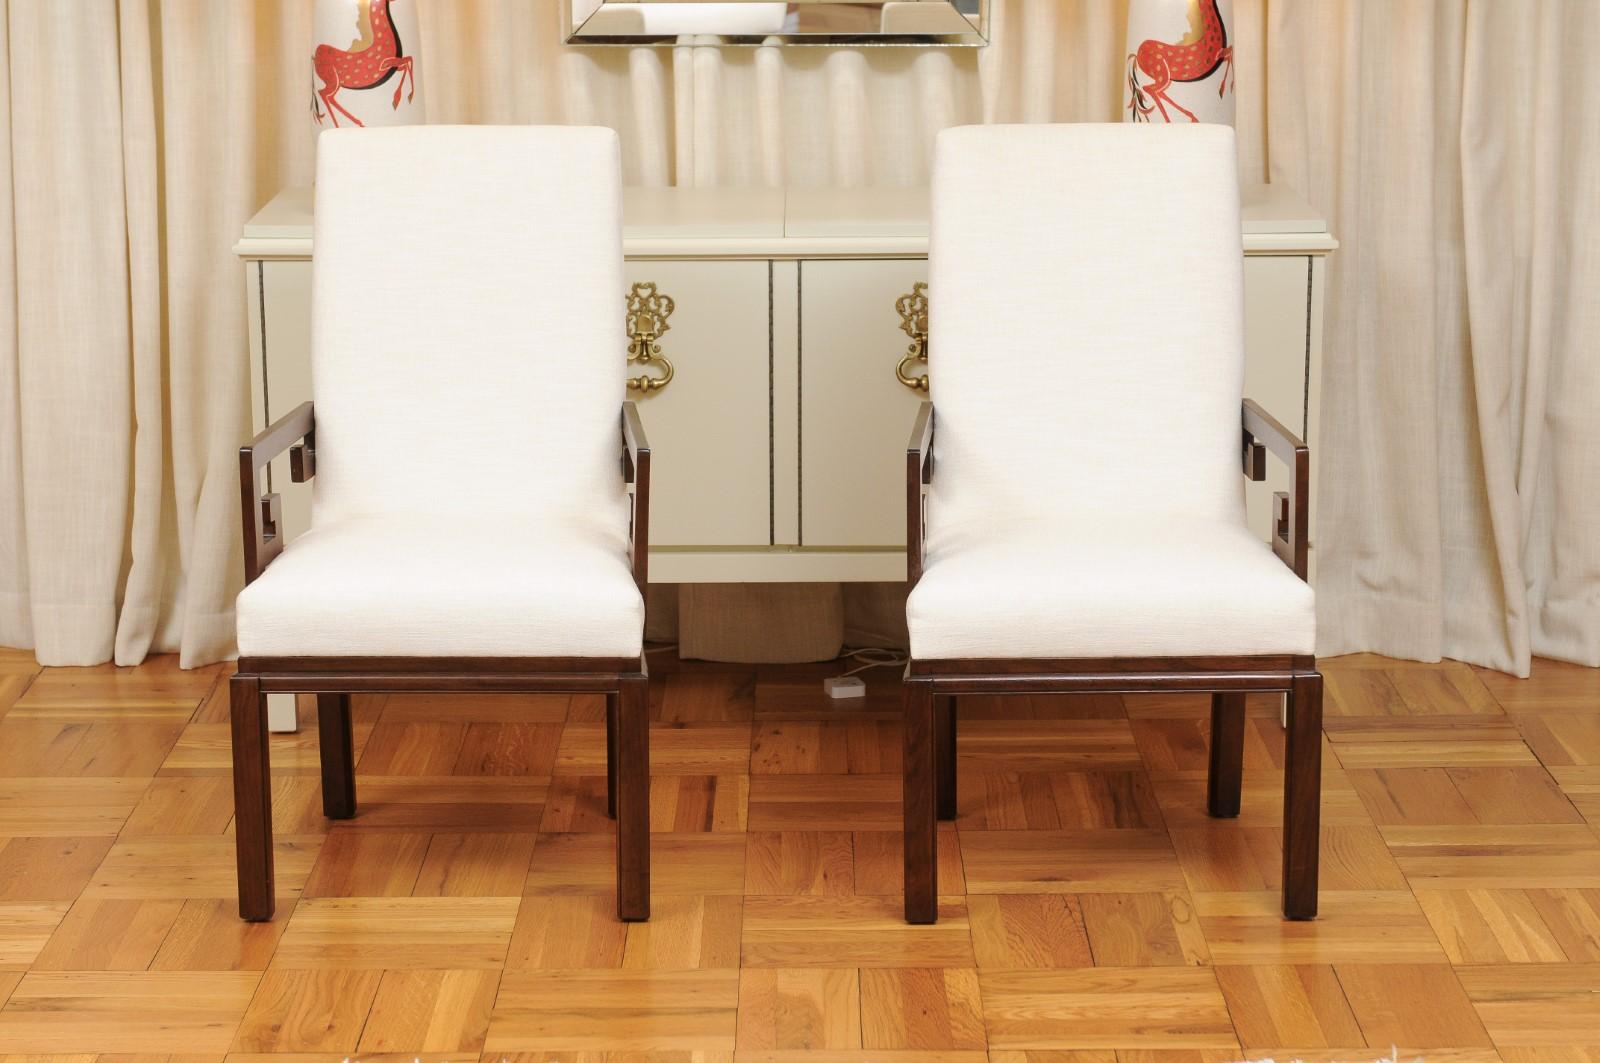 North American All Arms, Sublime Set of 12 Greek Key Chairs by Michael Taylor, circa 1970 For Sale